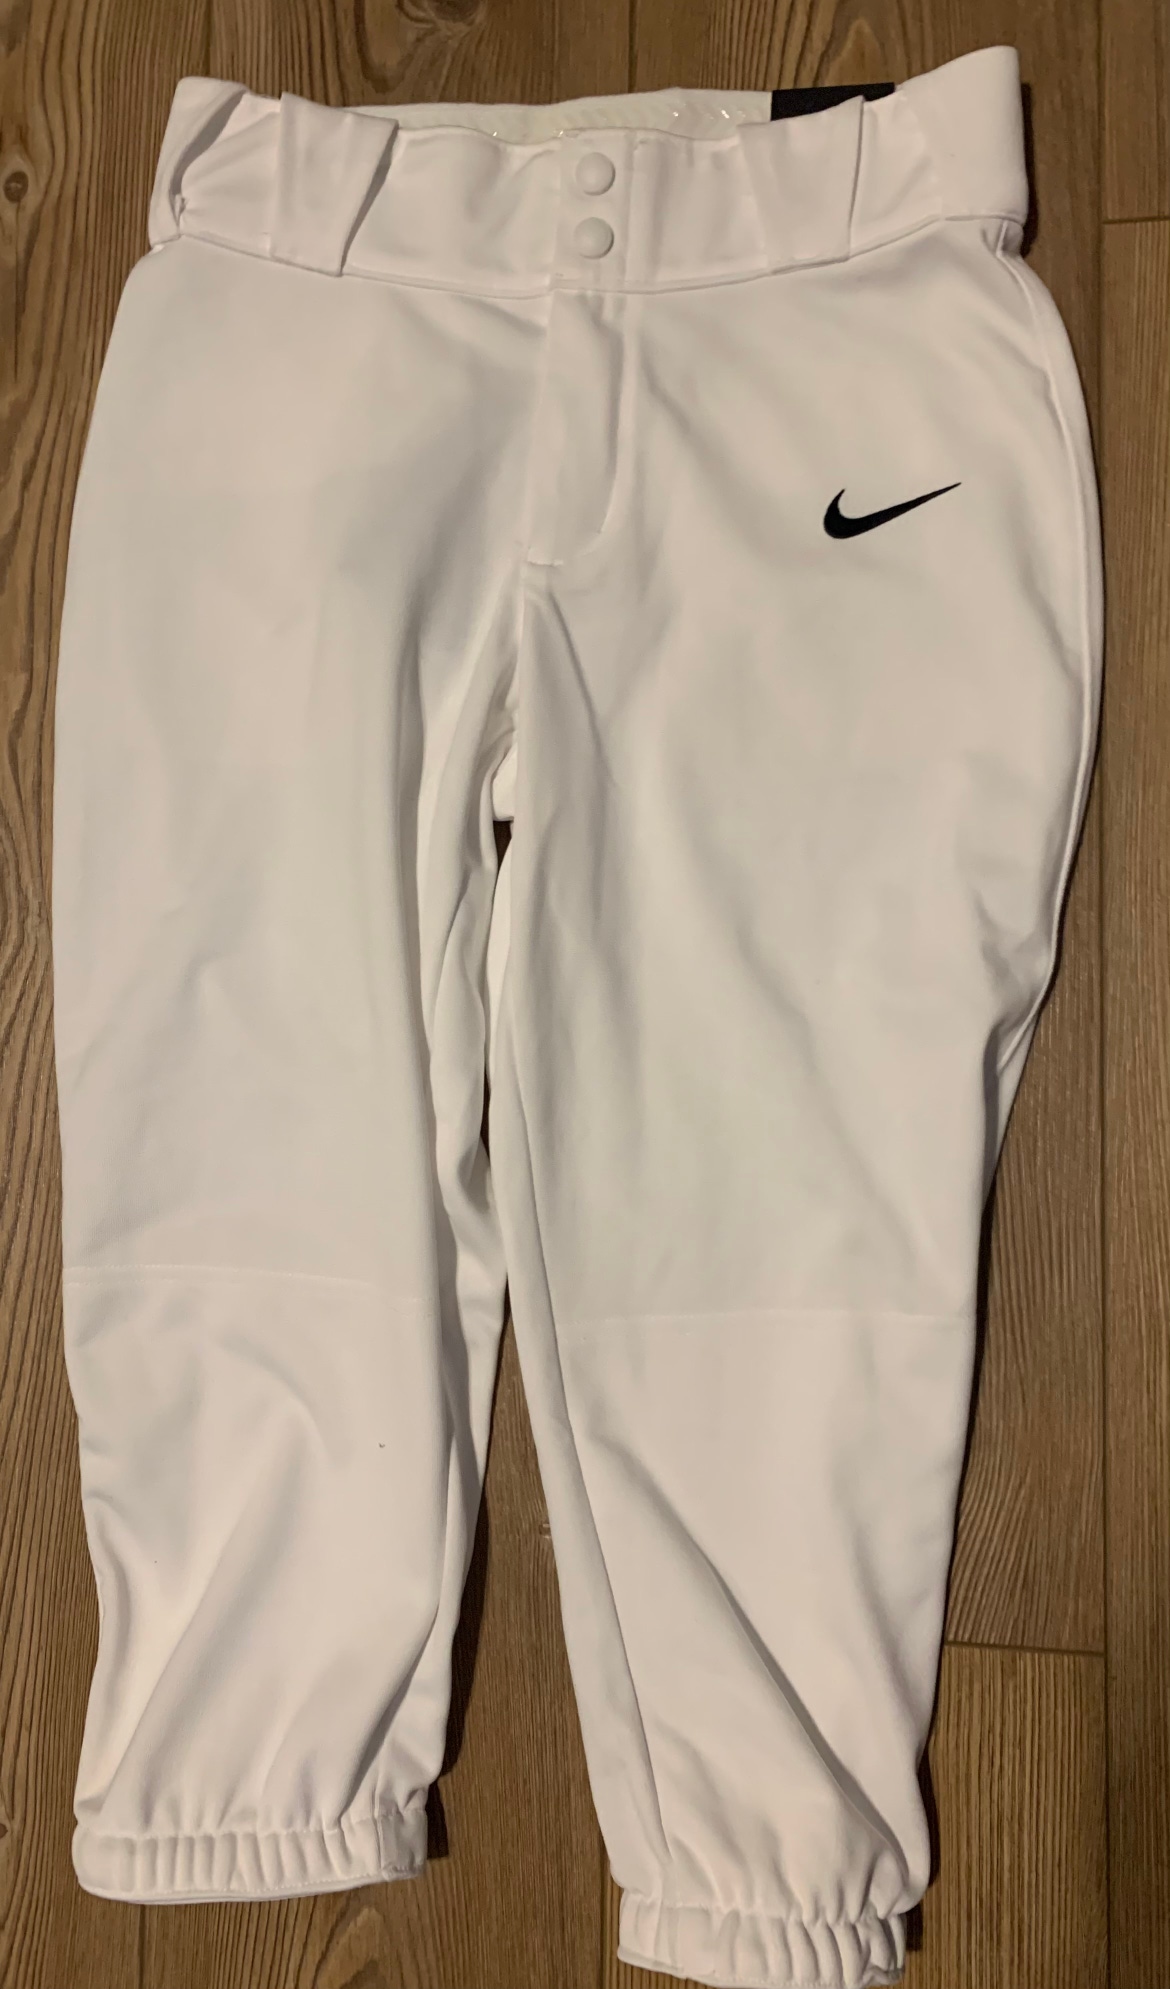 White Youth Girls New Small “Nike” Game Pants